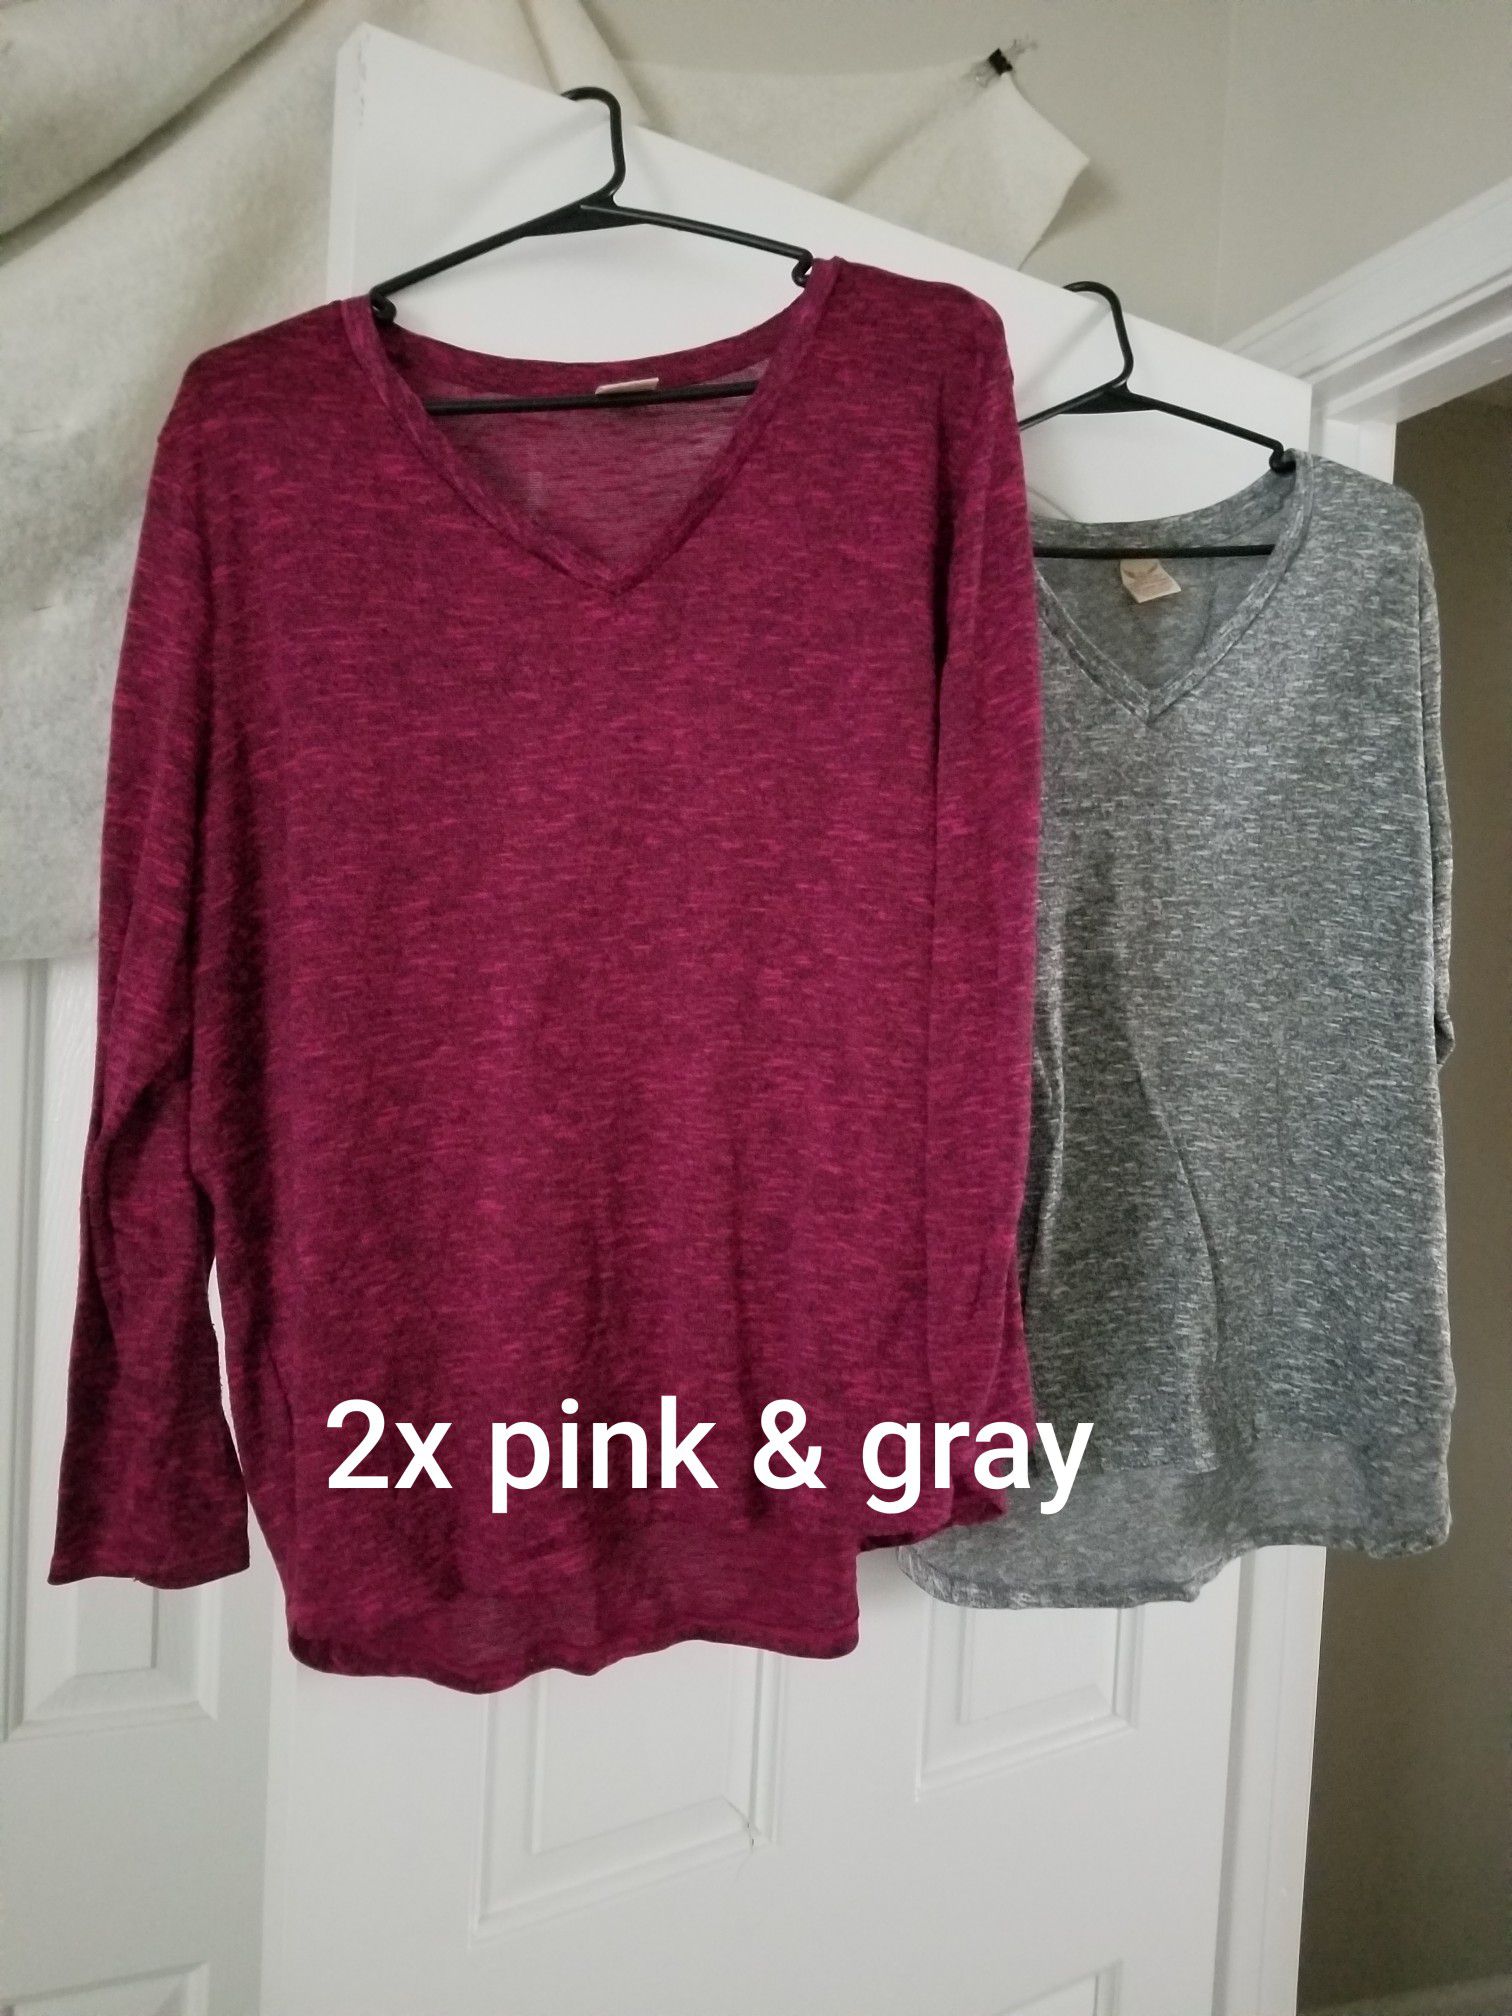 Size 2x shirts (2 for $5) one is gray & the other pink